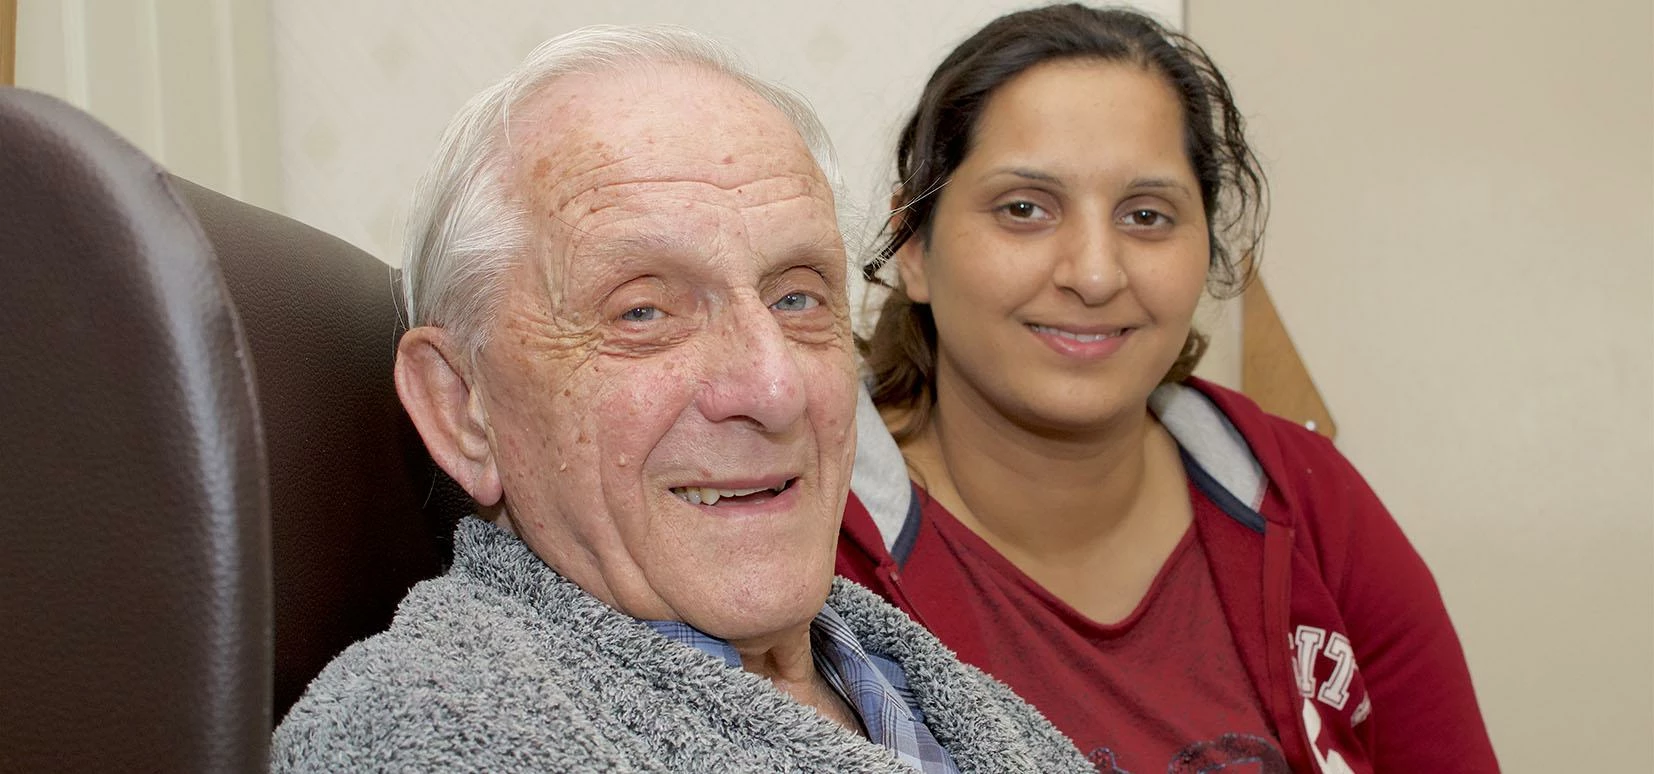 Manjit (right) is a personal assistant to Ray, ensuring he can still live an independent life 